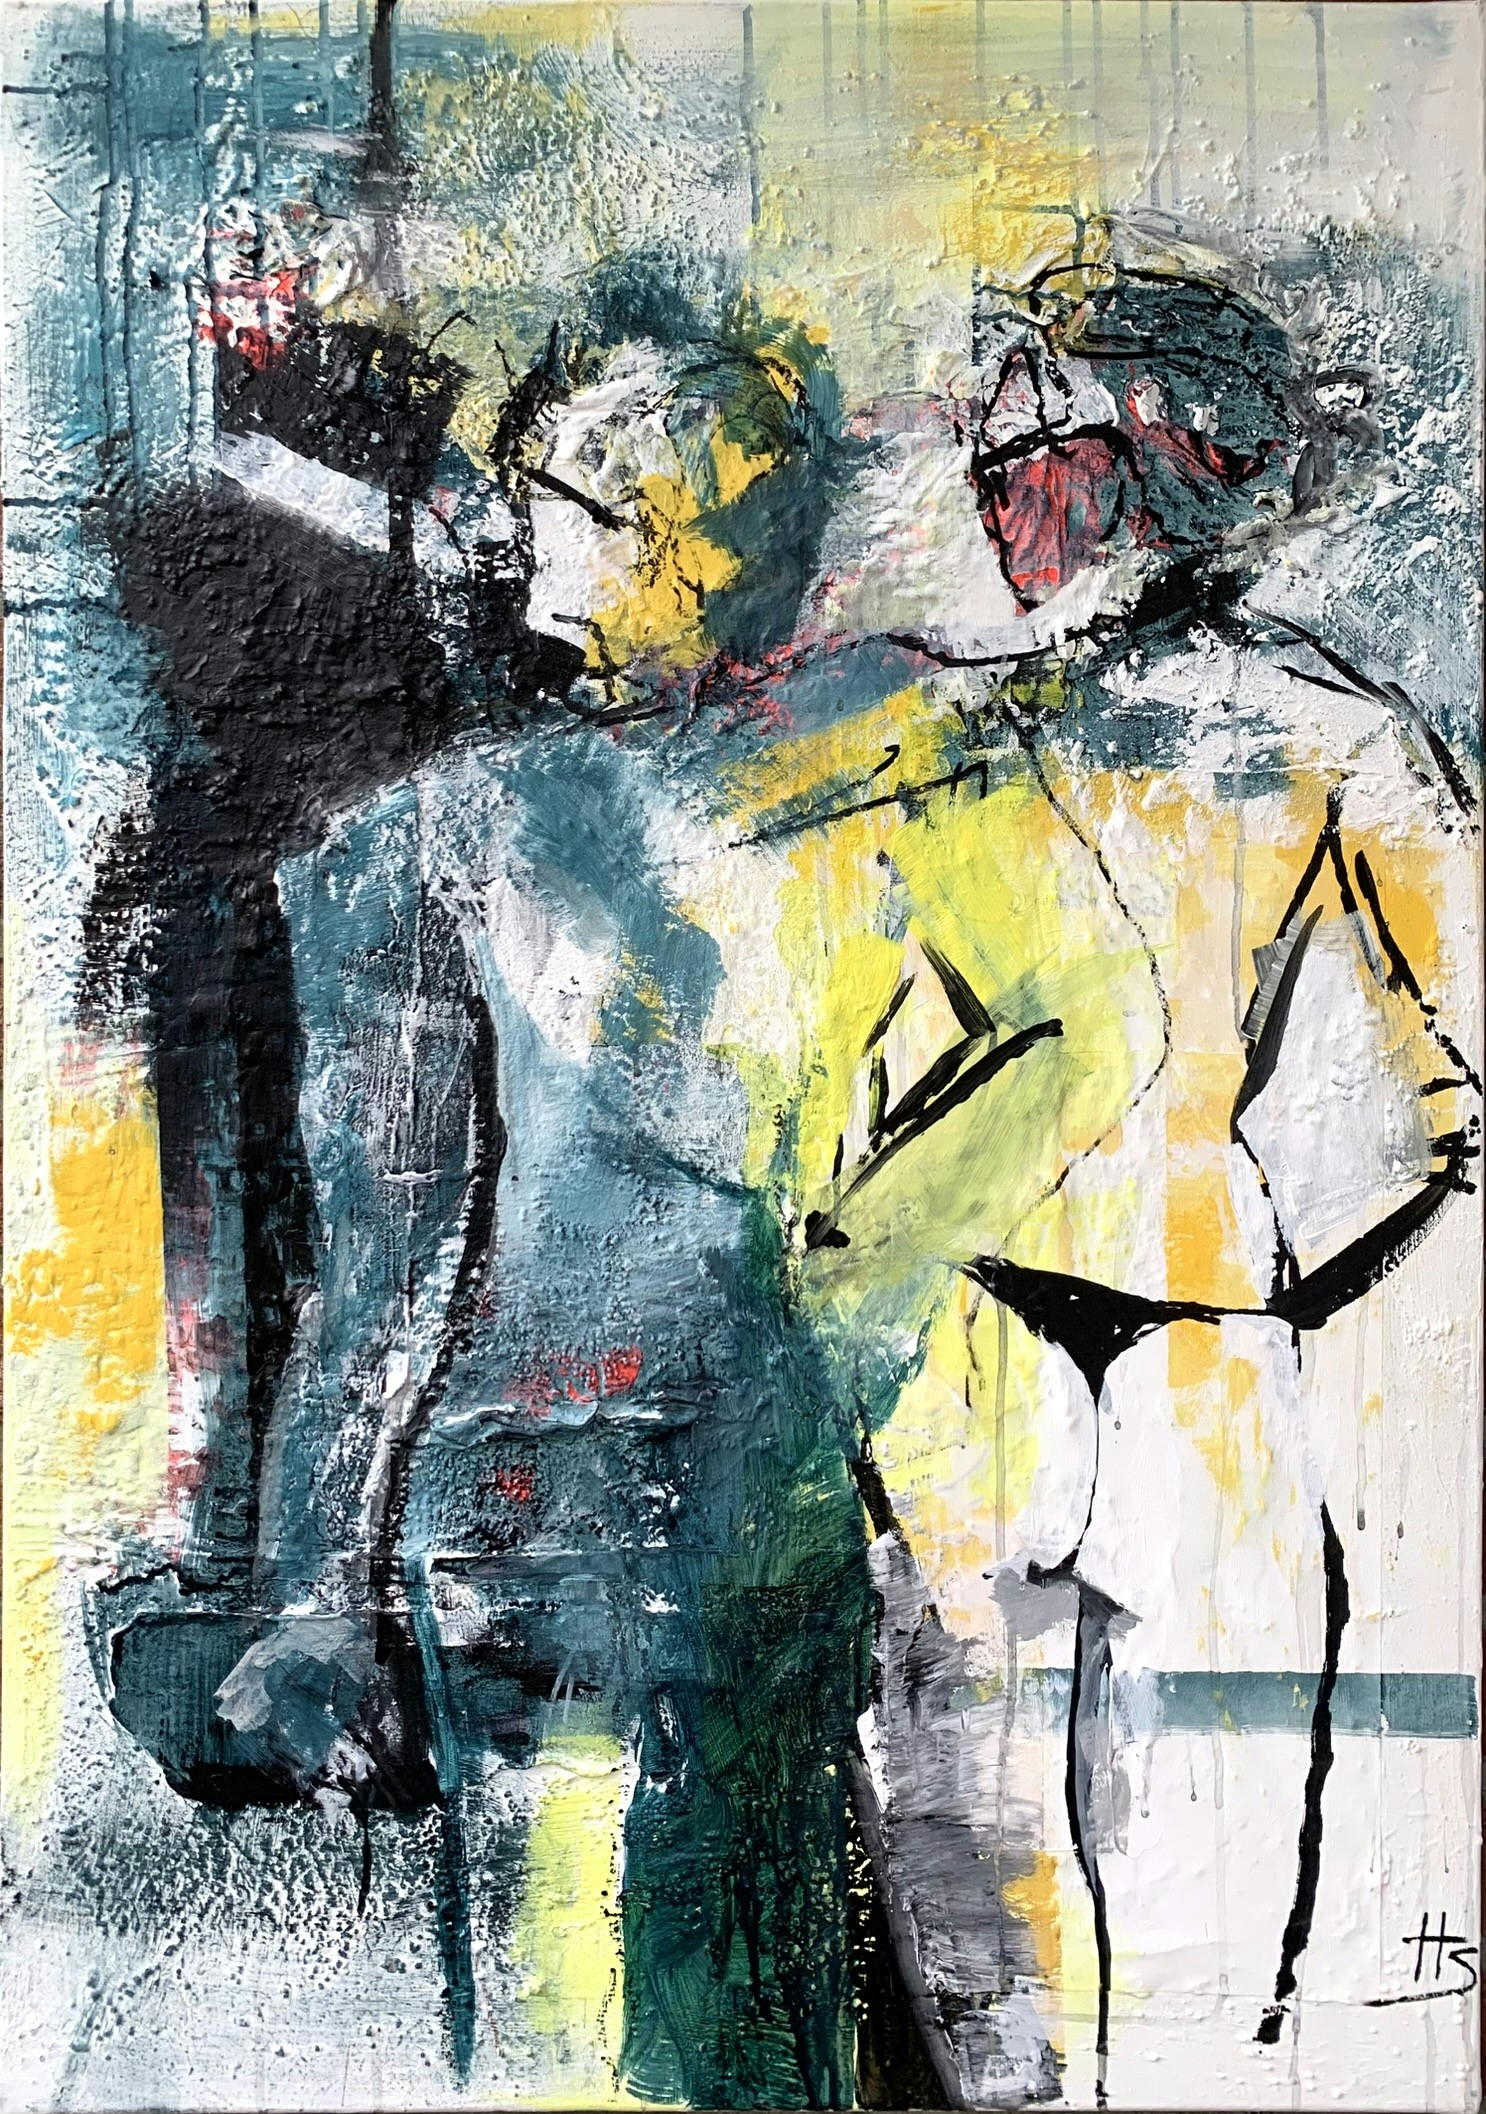 The artwork by Heike Schümann depicts two standing women from behind, looking in the same direction